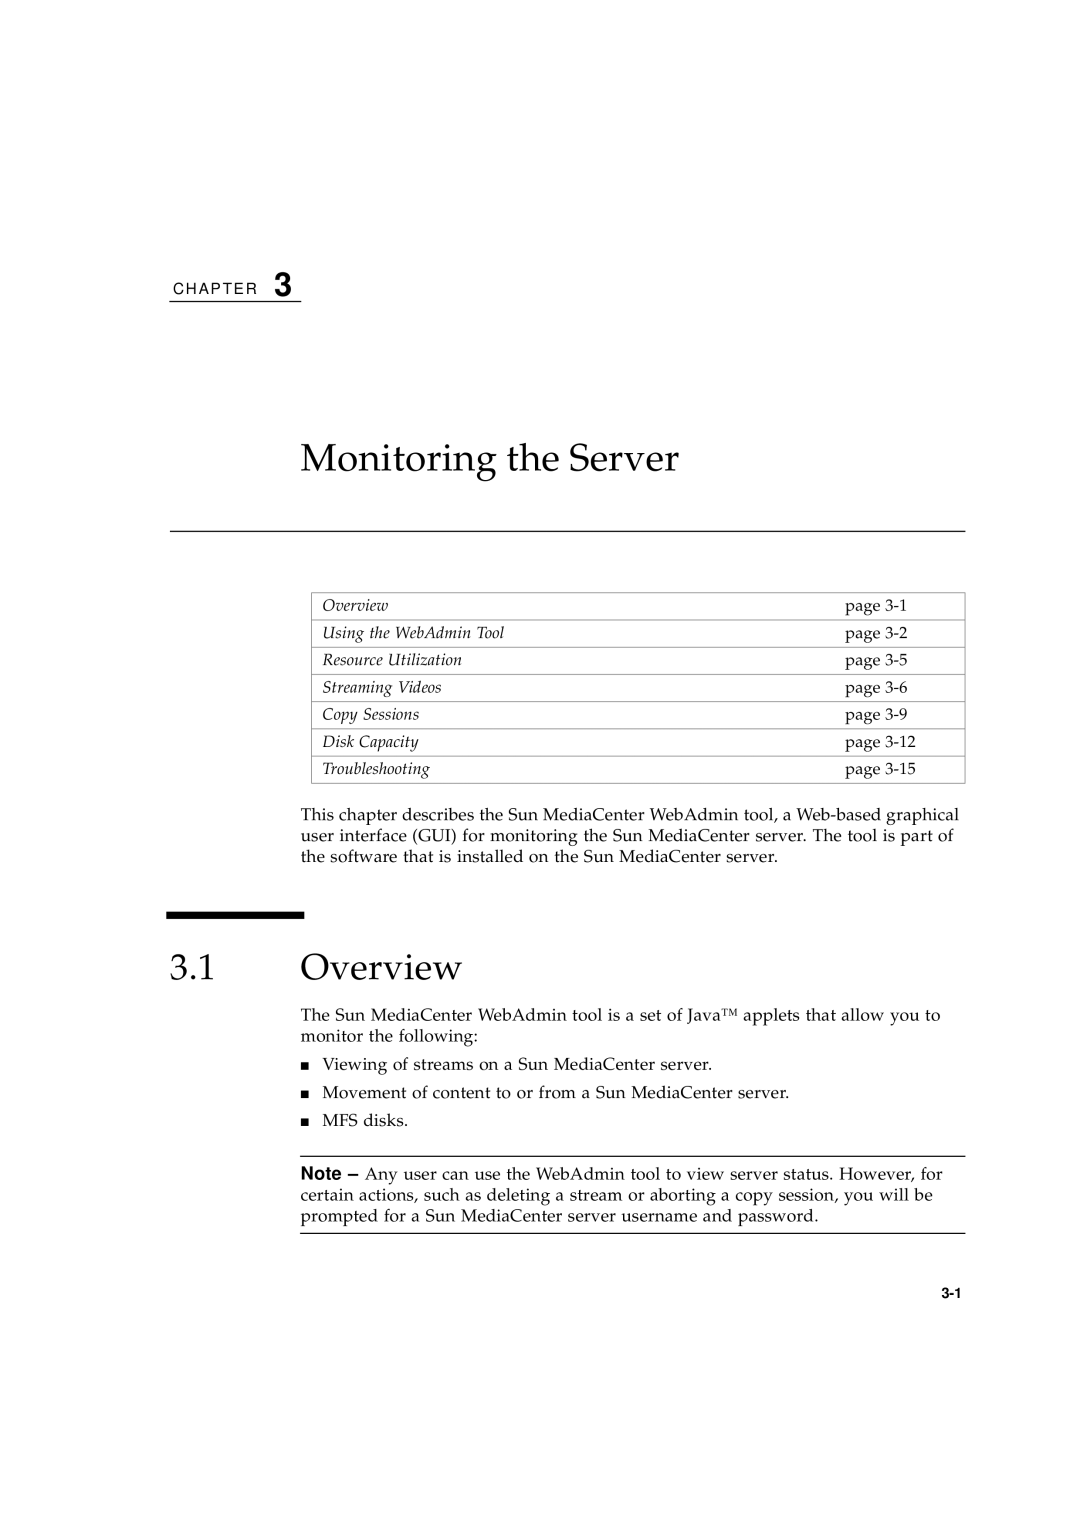 Sun Microsystems 2.1 manual Monitoring the Server, Overview 